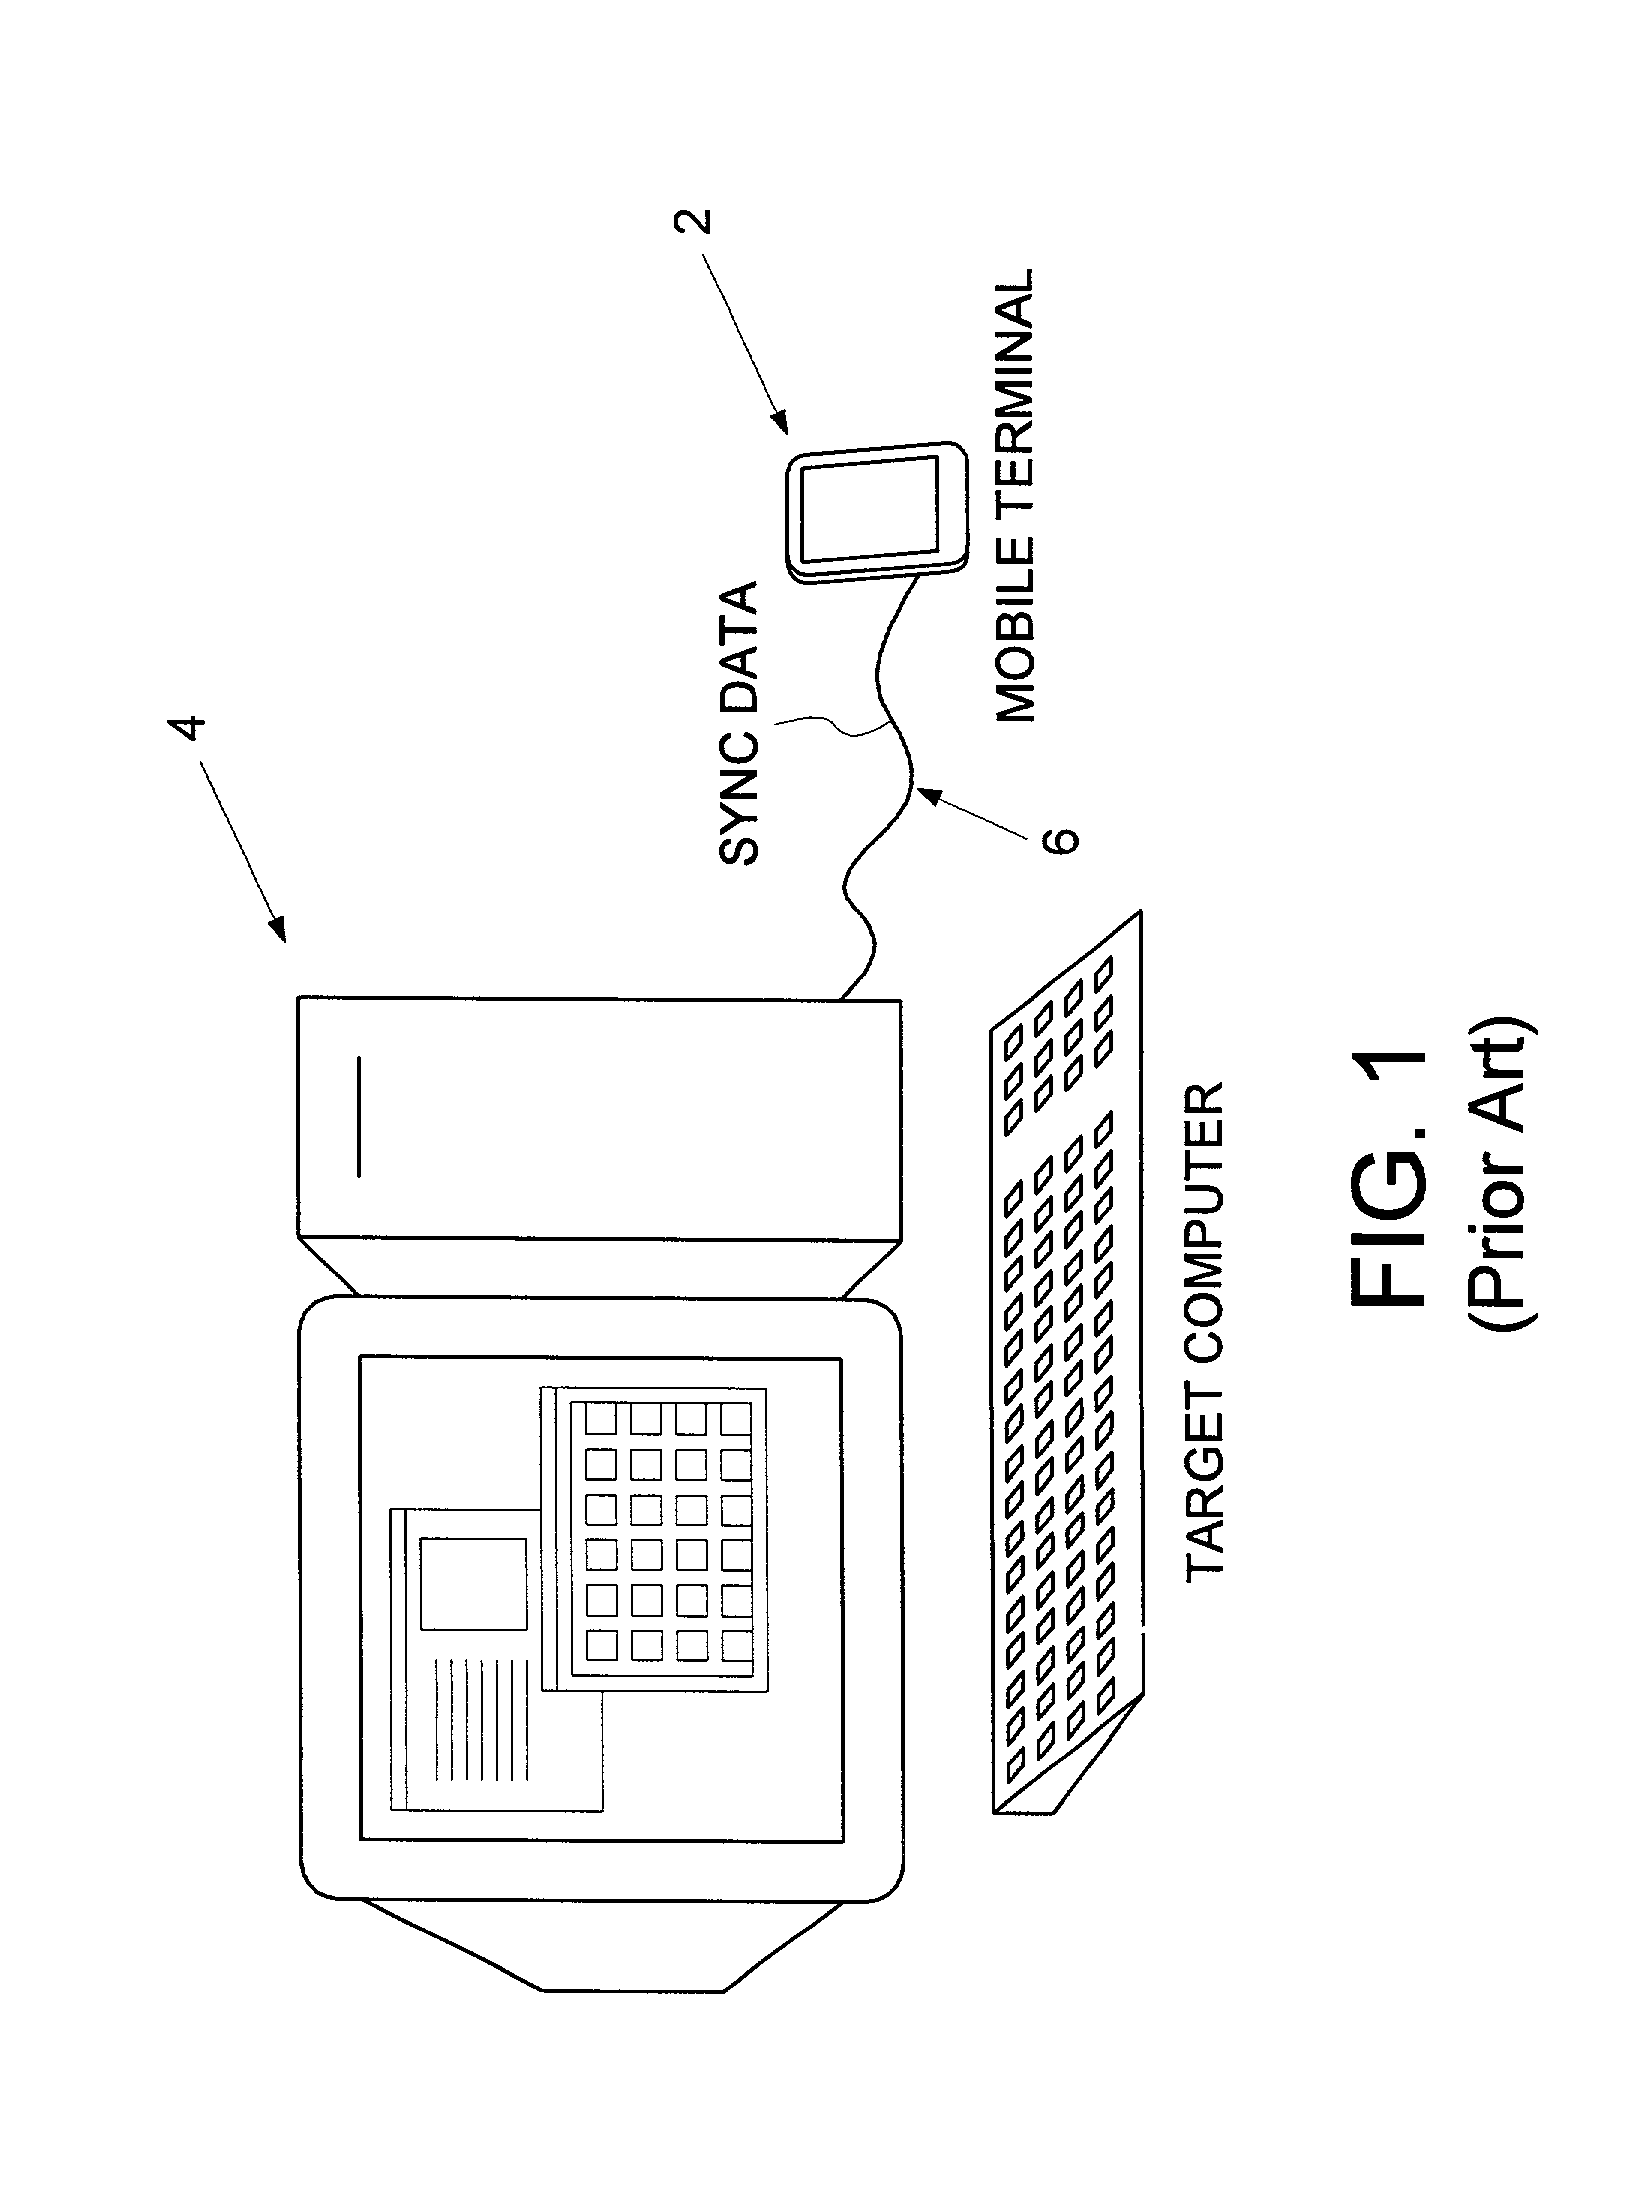 Remotely synchronizing a mobile terminal by adapting ordering and filtering synchronization rules based on a user's operation of the mobile terminal